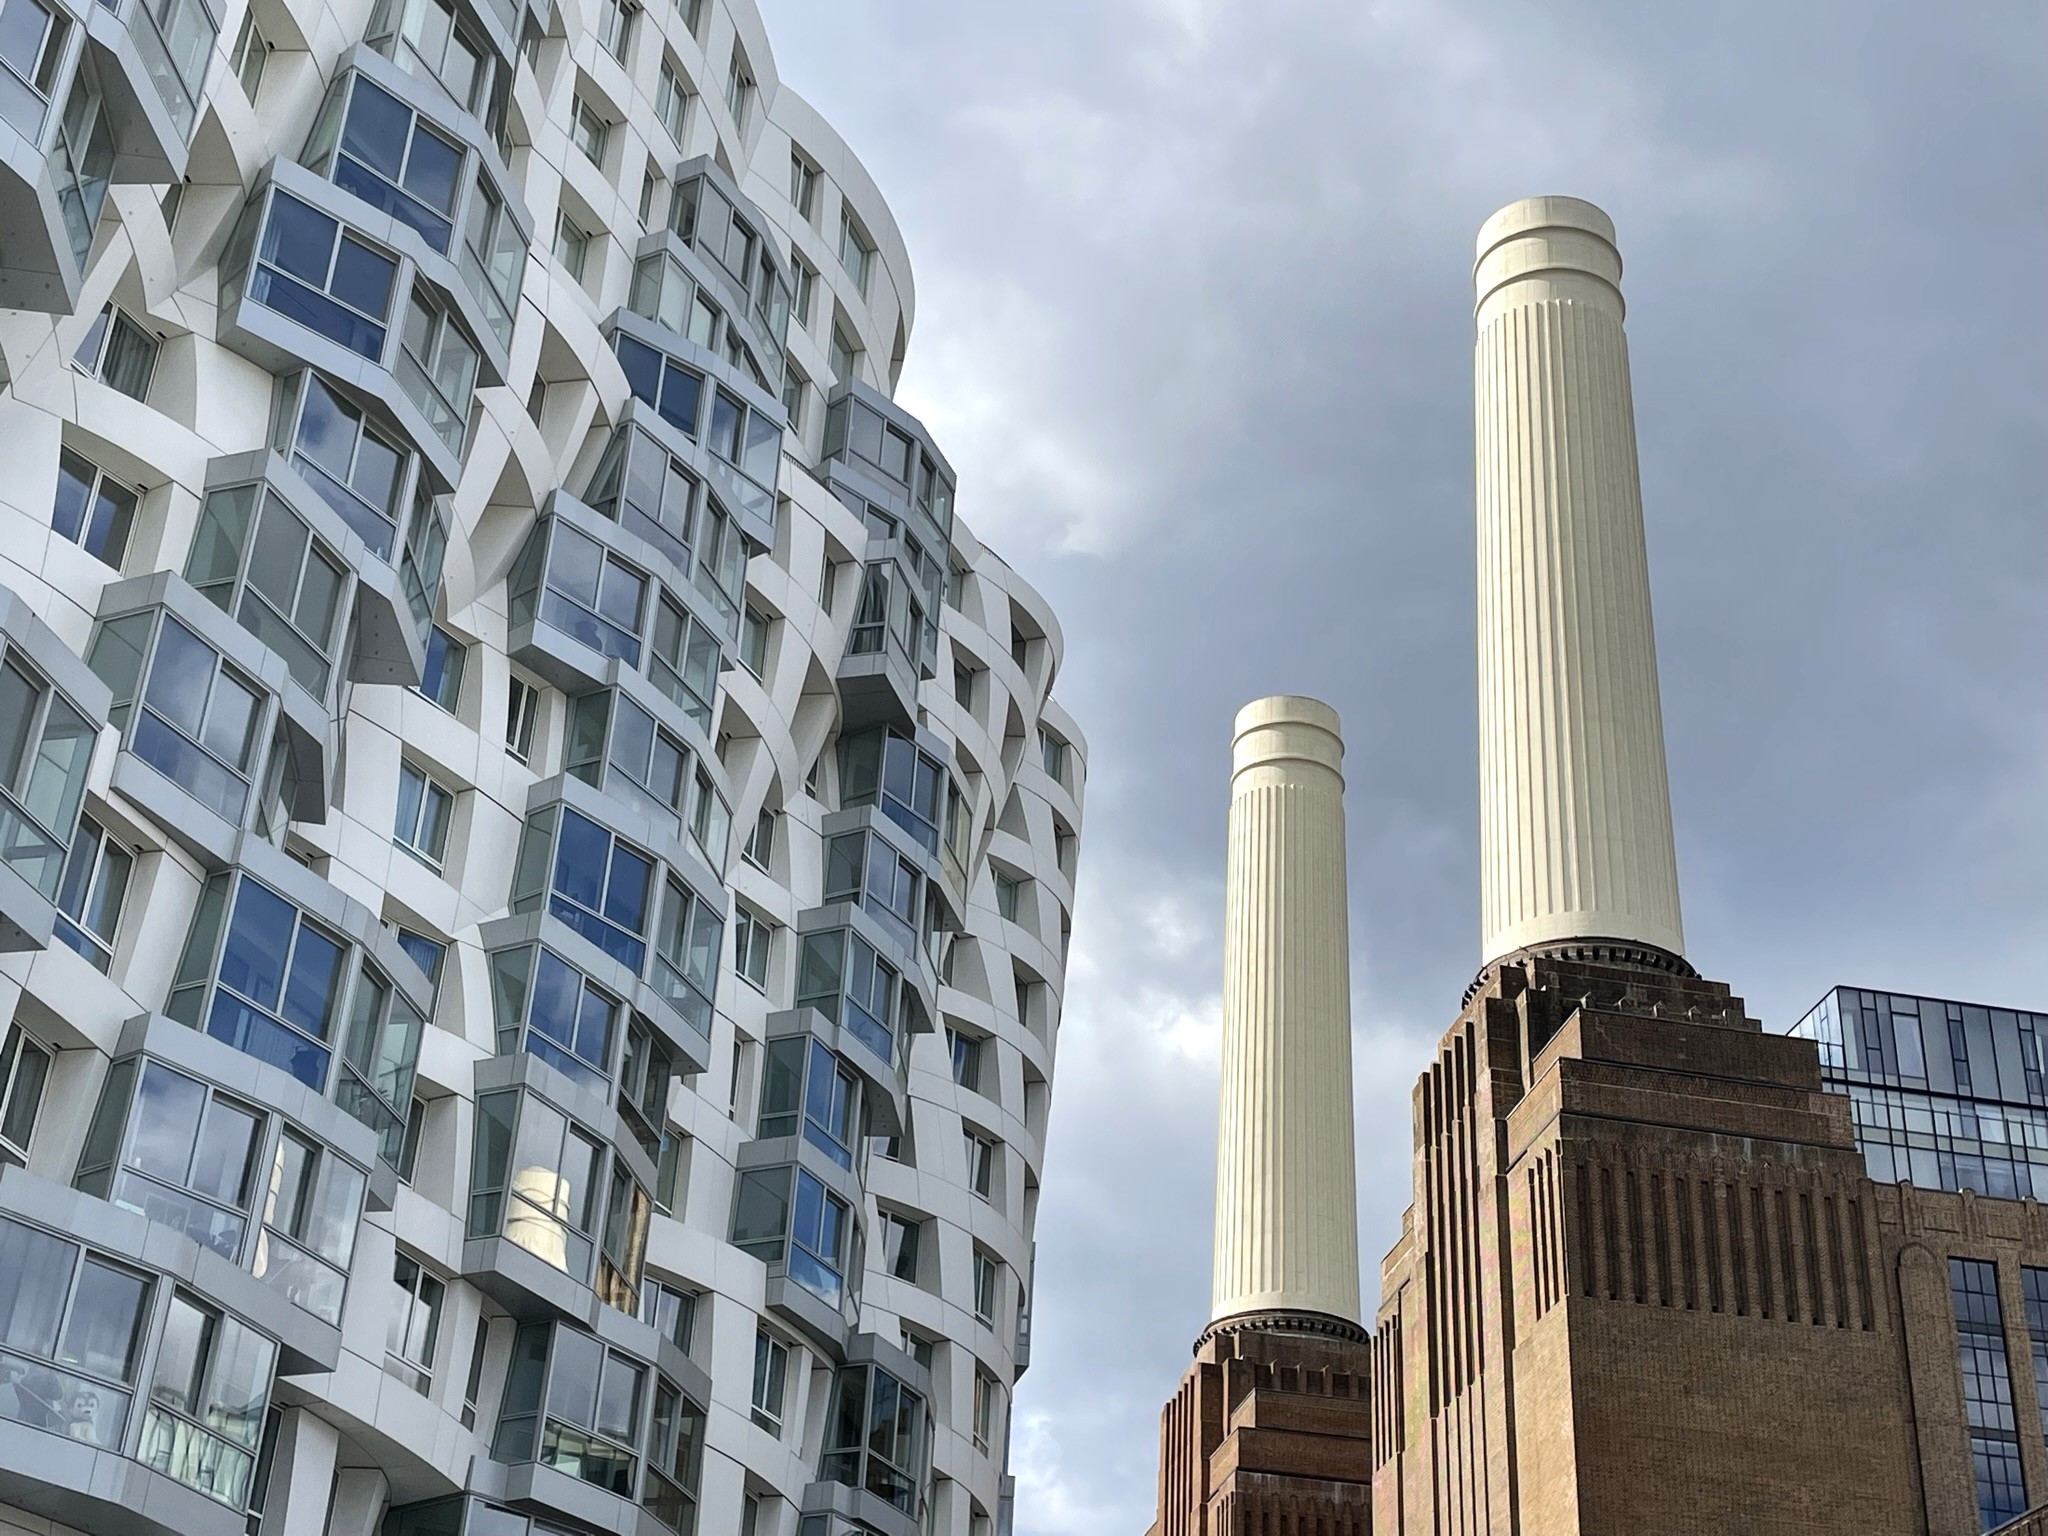 Nine Elms and Battersea: Big, Bold and Brand New